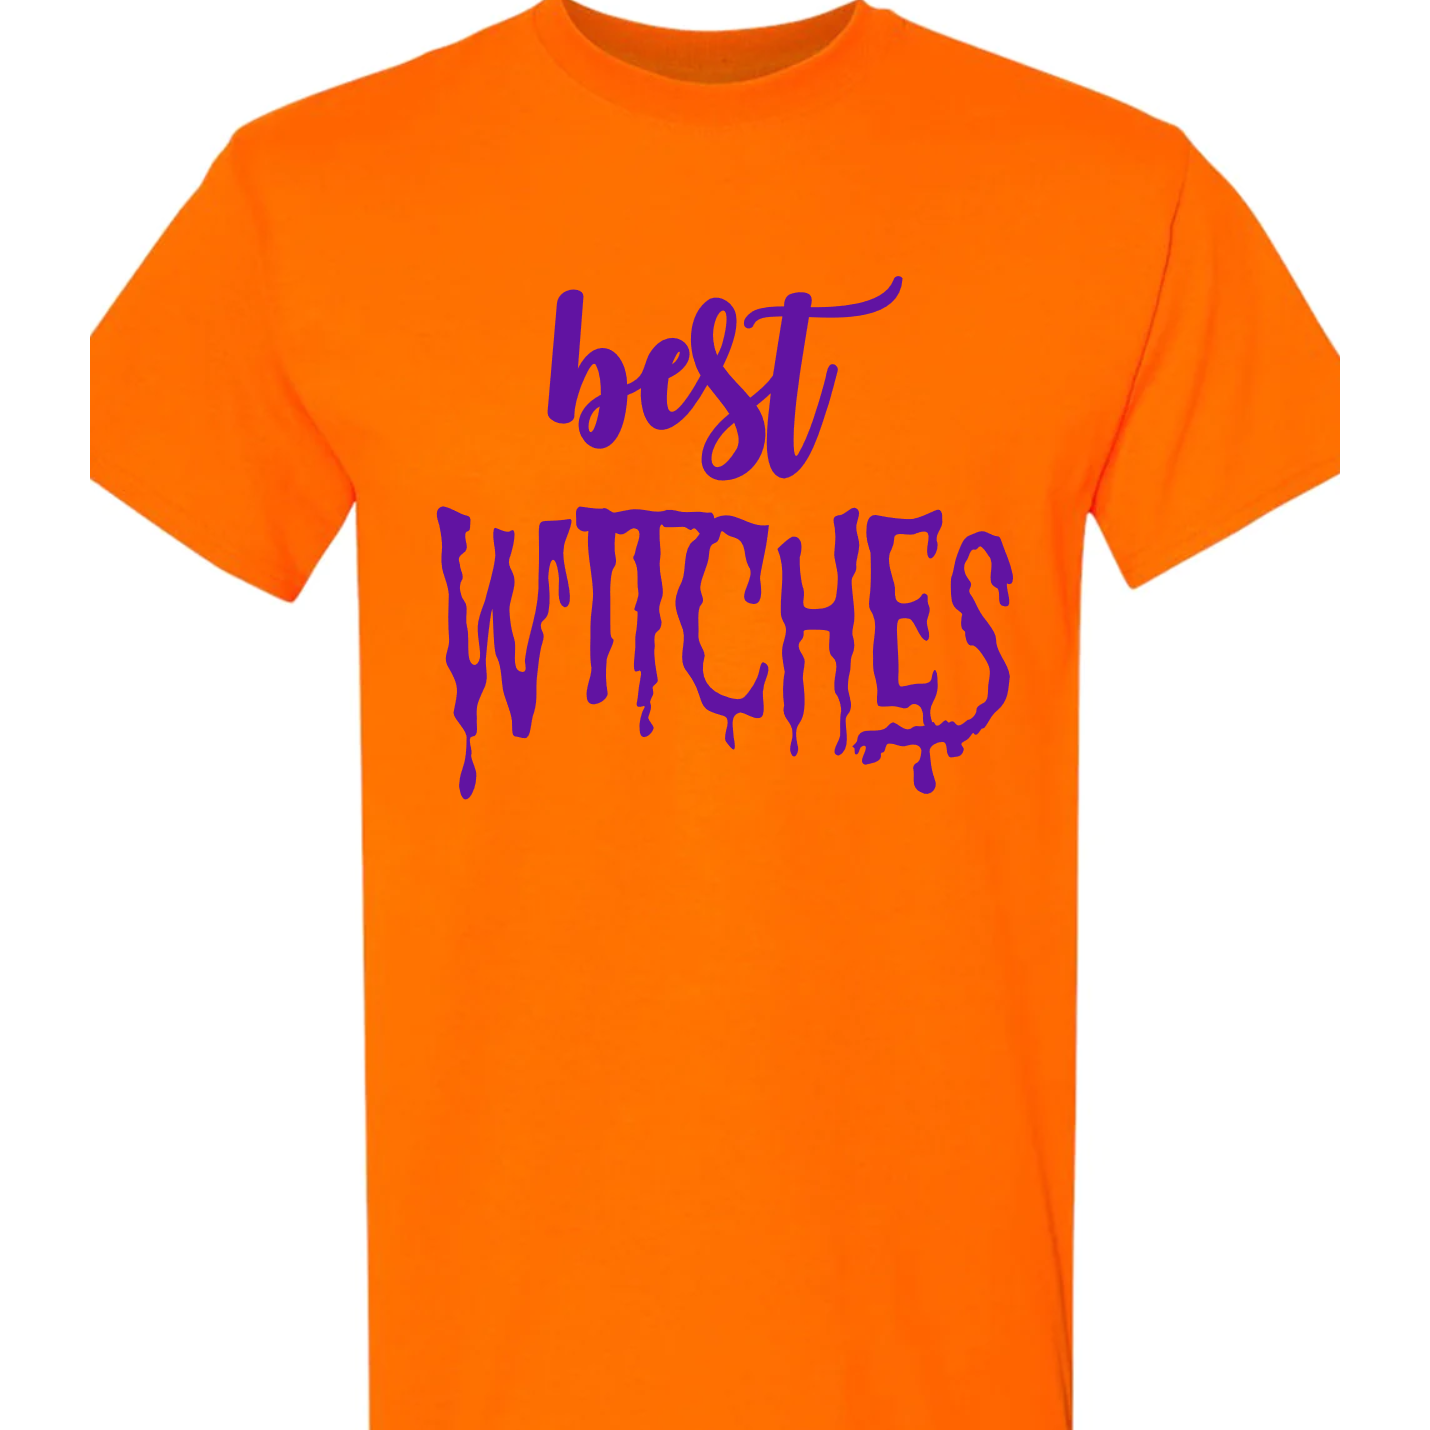 Best Witches Vinyl Graphic for Shirts